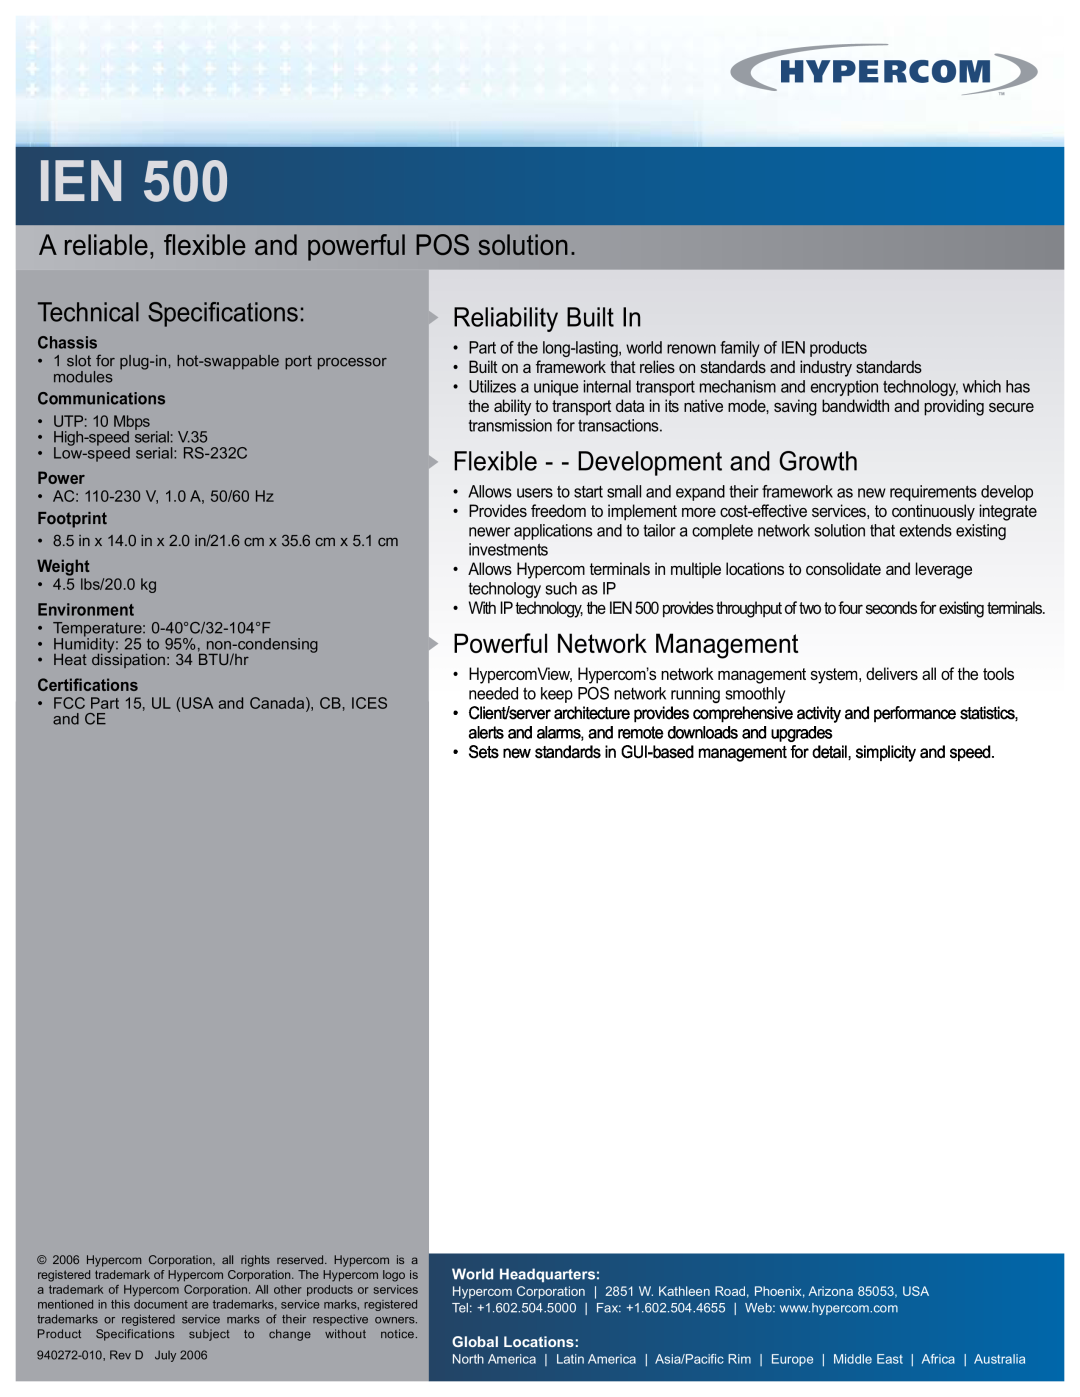 Hypercom IEN 500 Technical Specifications, Reliability Built In, Flexible - - Development and Growth, IEN500, Chassis 